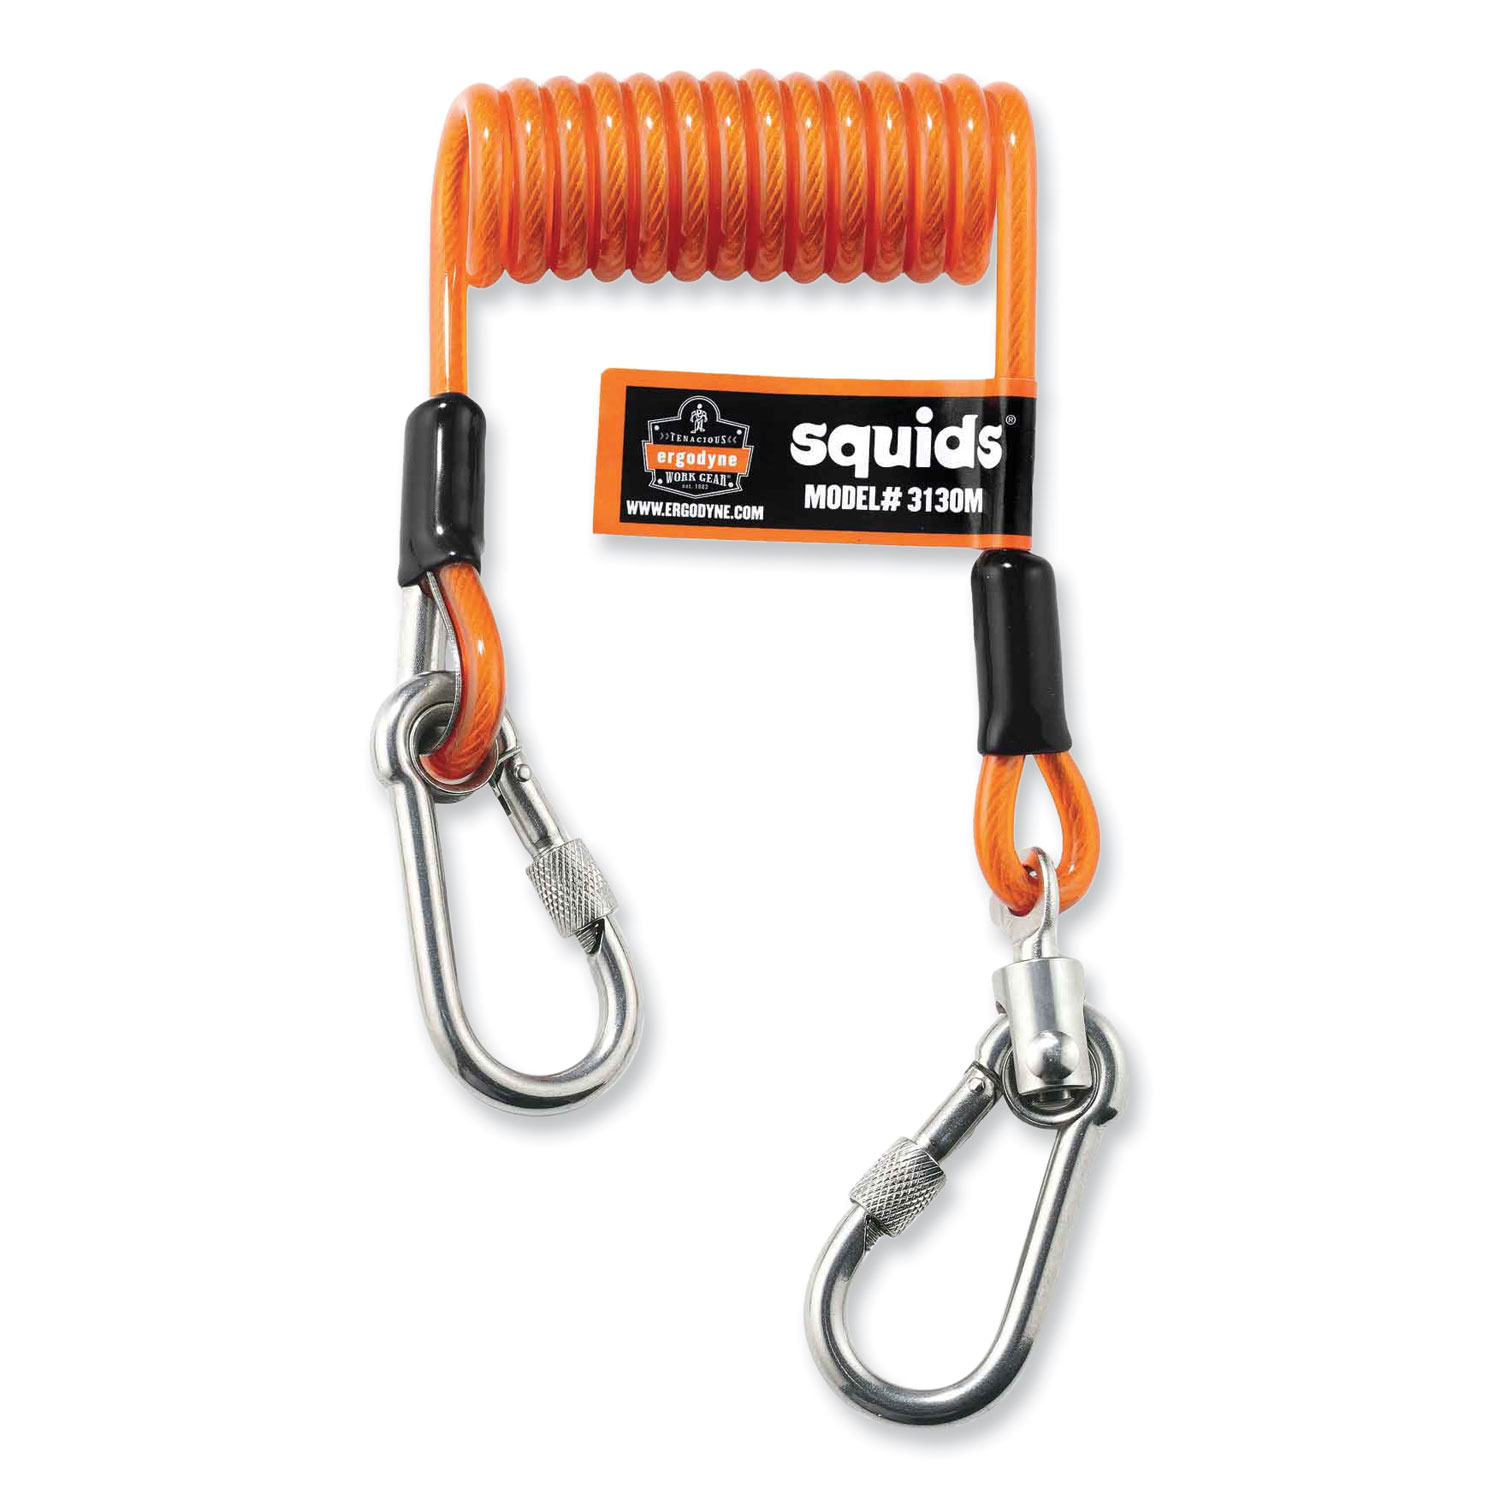 Squids 3130M Coiled Cable Lanyard with Carabiners, 5 lb Max